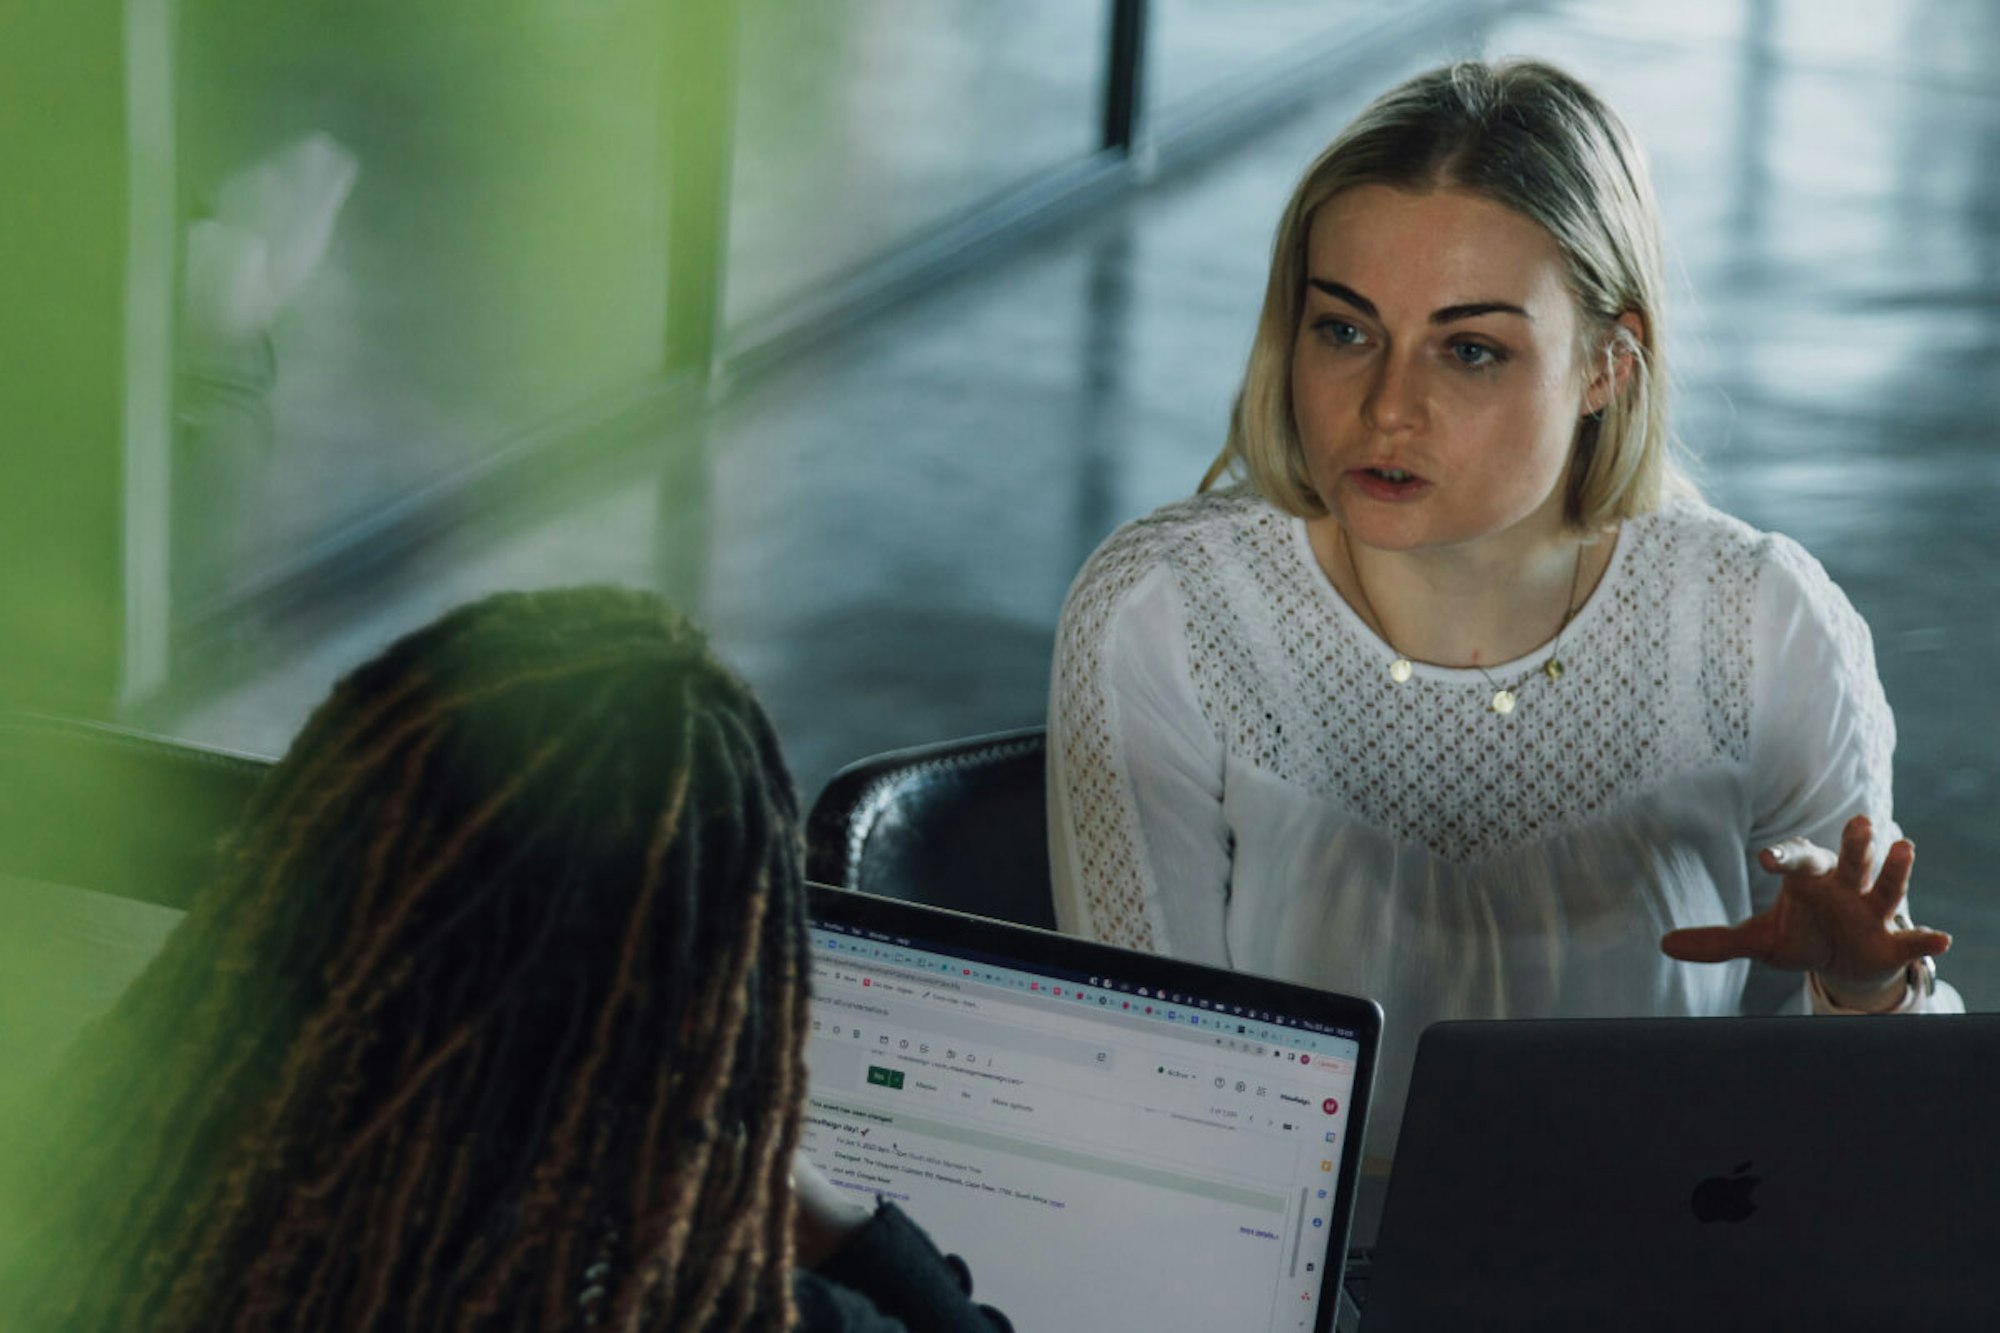 MakeReign women team members collaborating at an office with laptops, one wearing glasses and locs while blonde woman discusses with the first woman